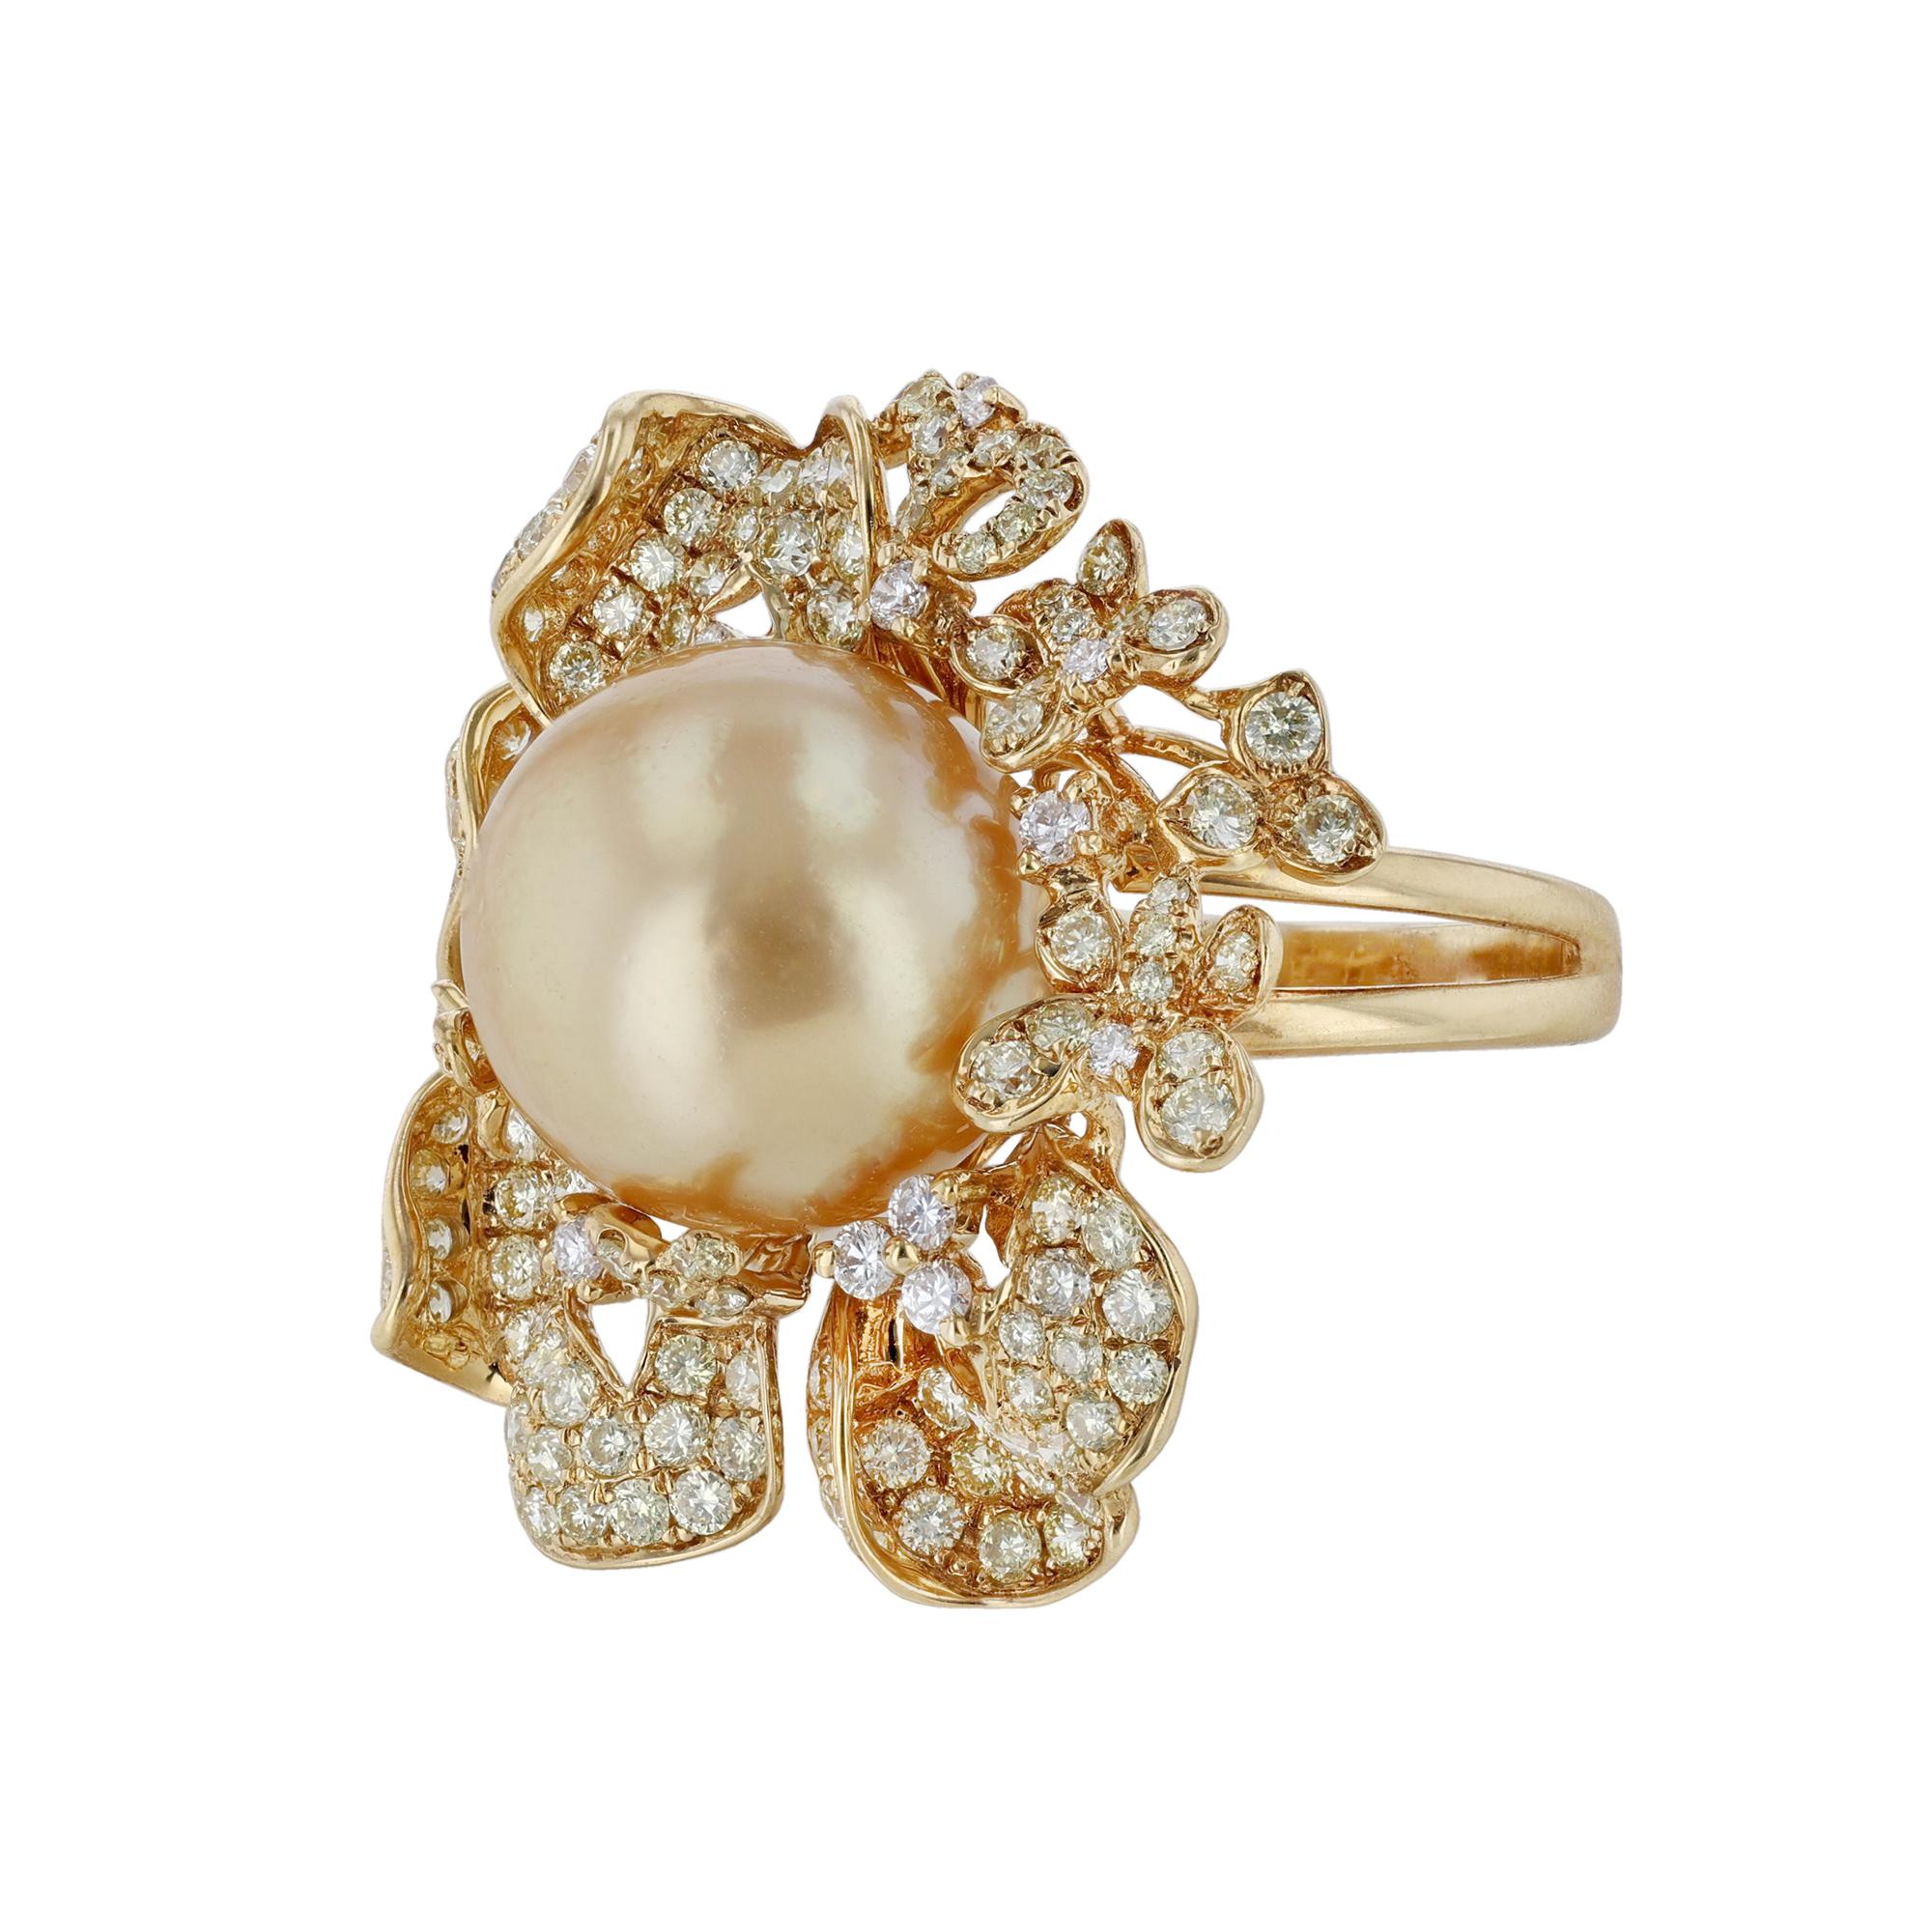 This ring is made in 18K yellow gold and features a 13.50 millimeter Golden South Sea Pearl. Surrounded by a floral with butterflies motif of 143 yellow weighing 2.03 carats and 13 white round cut diamonds weighing 0.24 carats. 